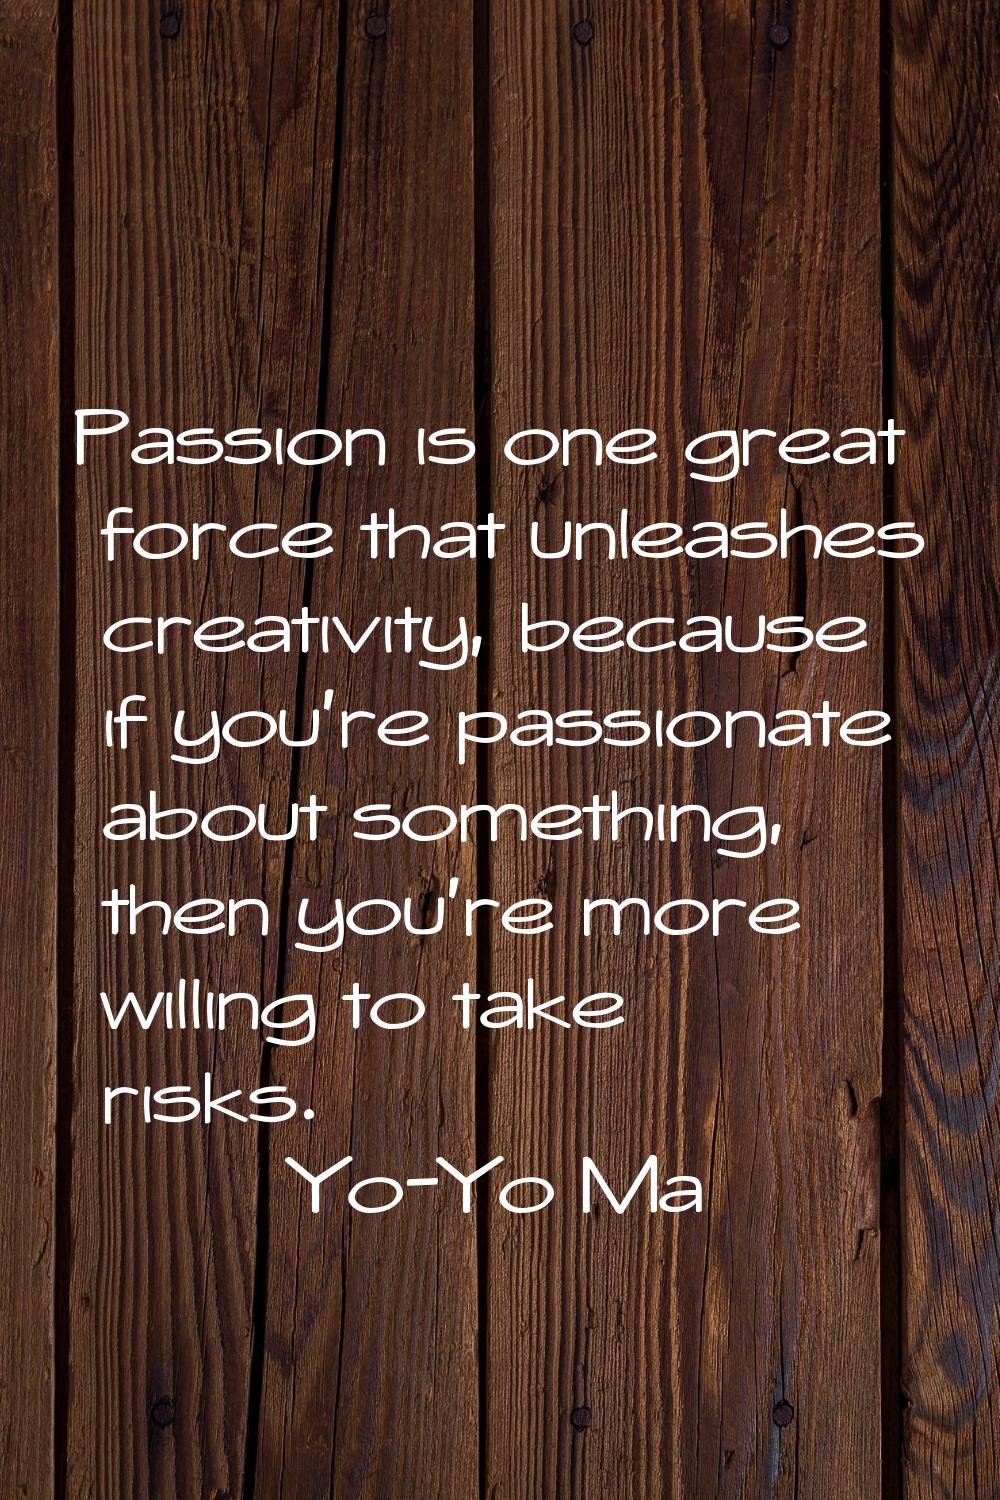 Passion is one great force that unleashes creativity, because if you're passionate about something,